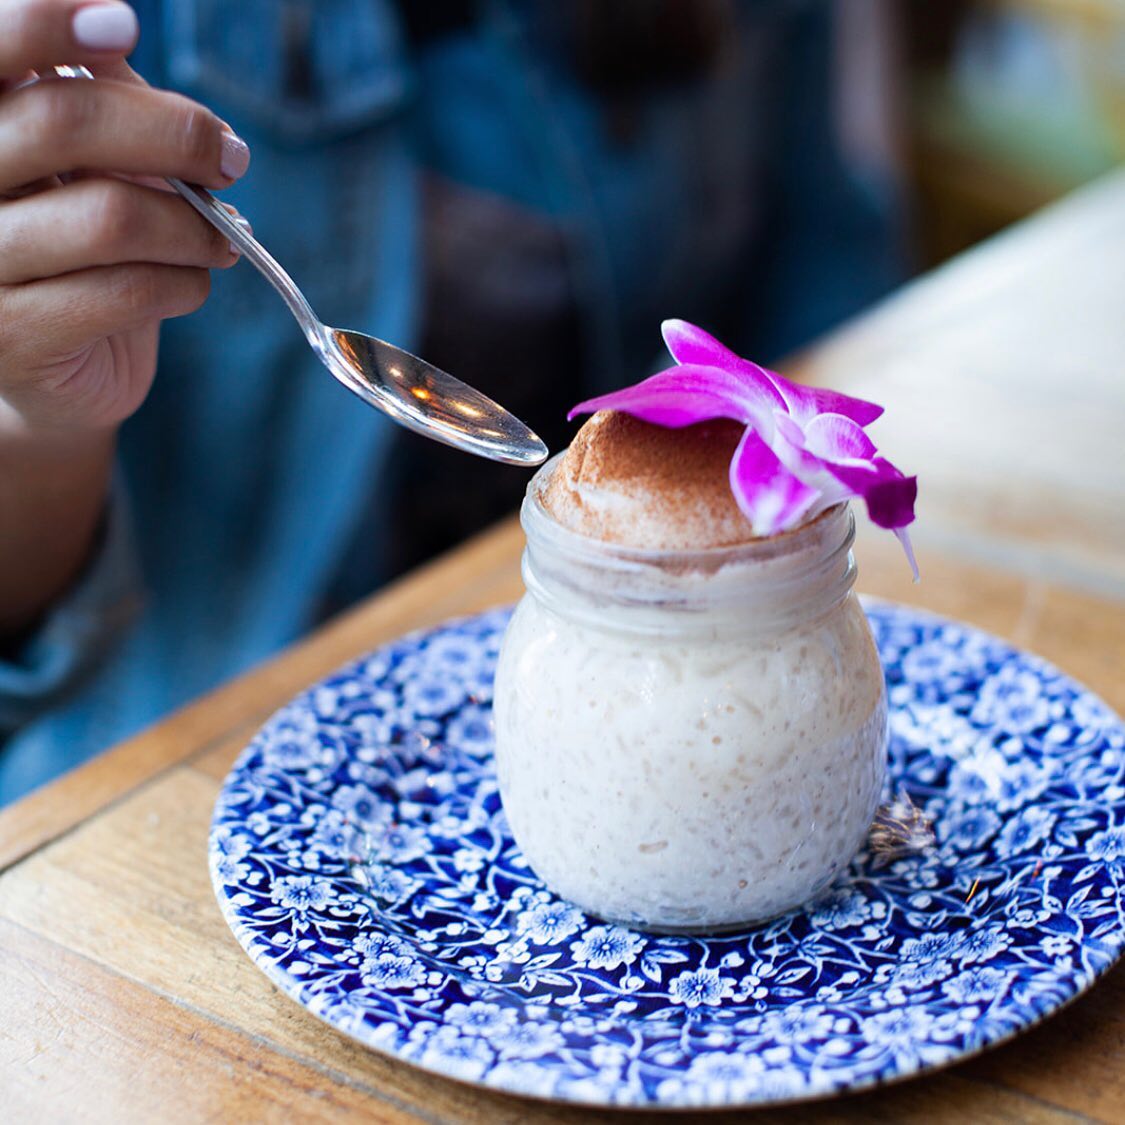 Miami Desserts: Rice pudding from Tacology in Brickell